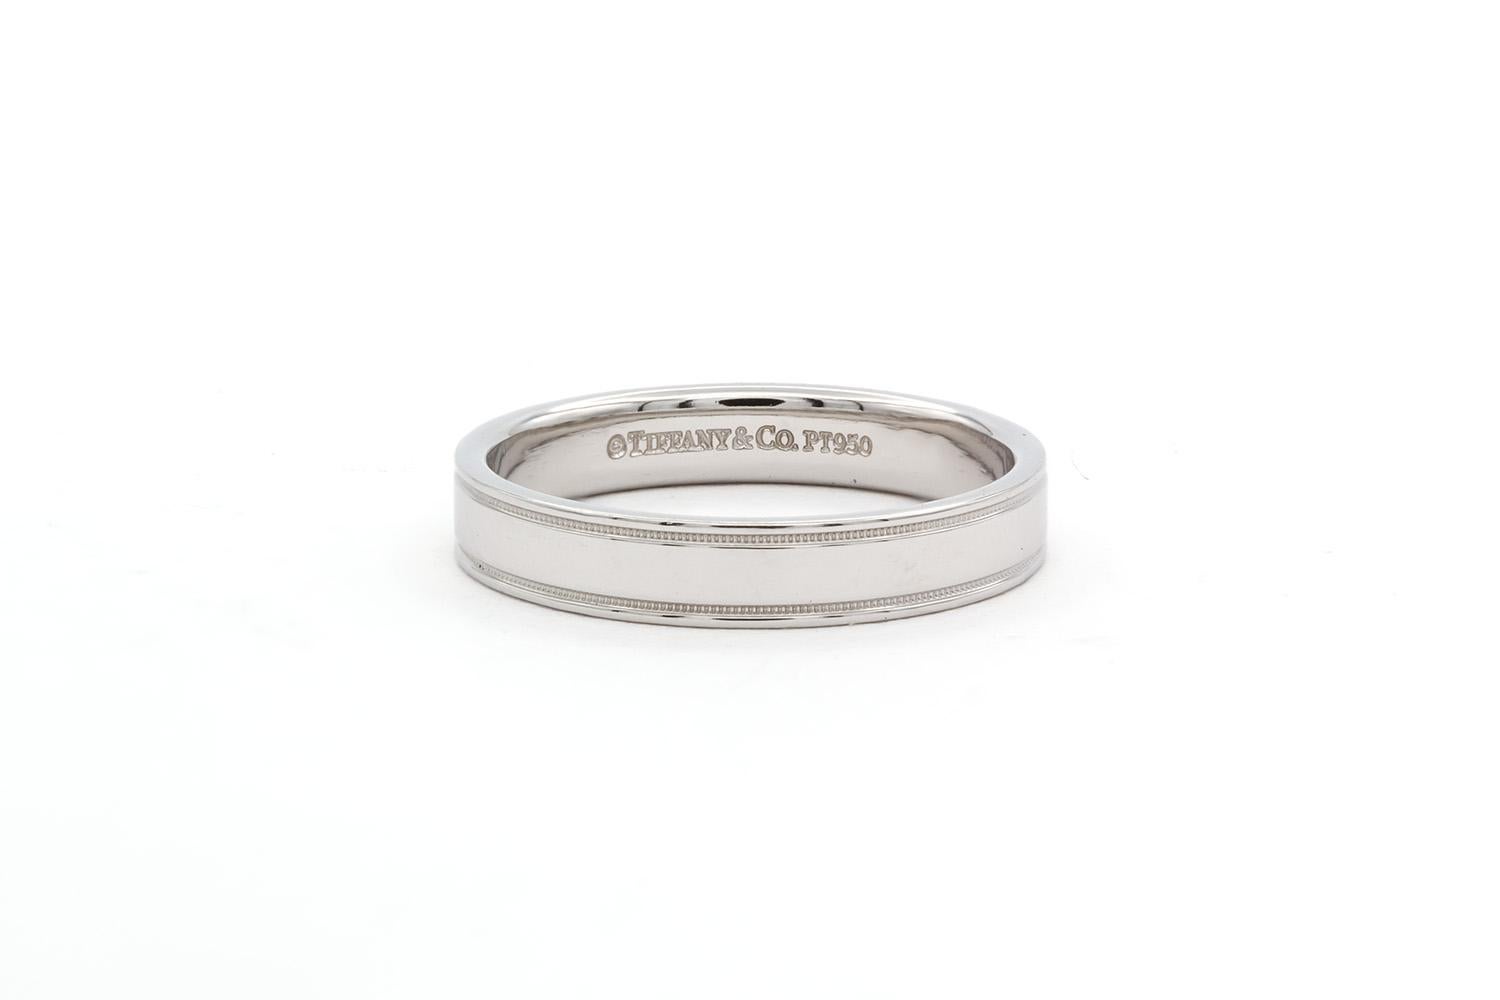 We are pleased to offer this Authentic Tiffany & Co. Platinum Double Milgrain Mens Wedding Band Ring. It features a classic mens Tiffanys band design in .950 Platinum, measuring 4mm wide with double milgrain. It is a size 10.25 US. The ring is in